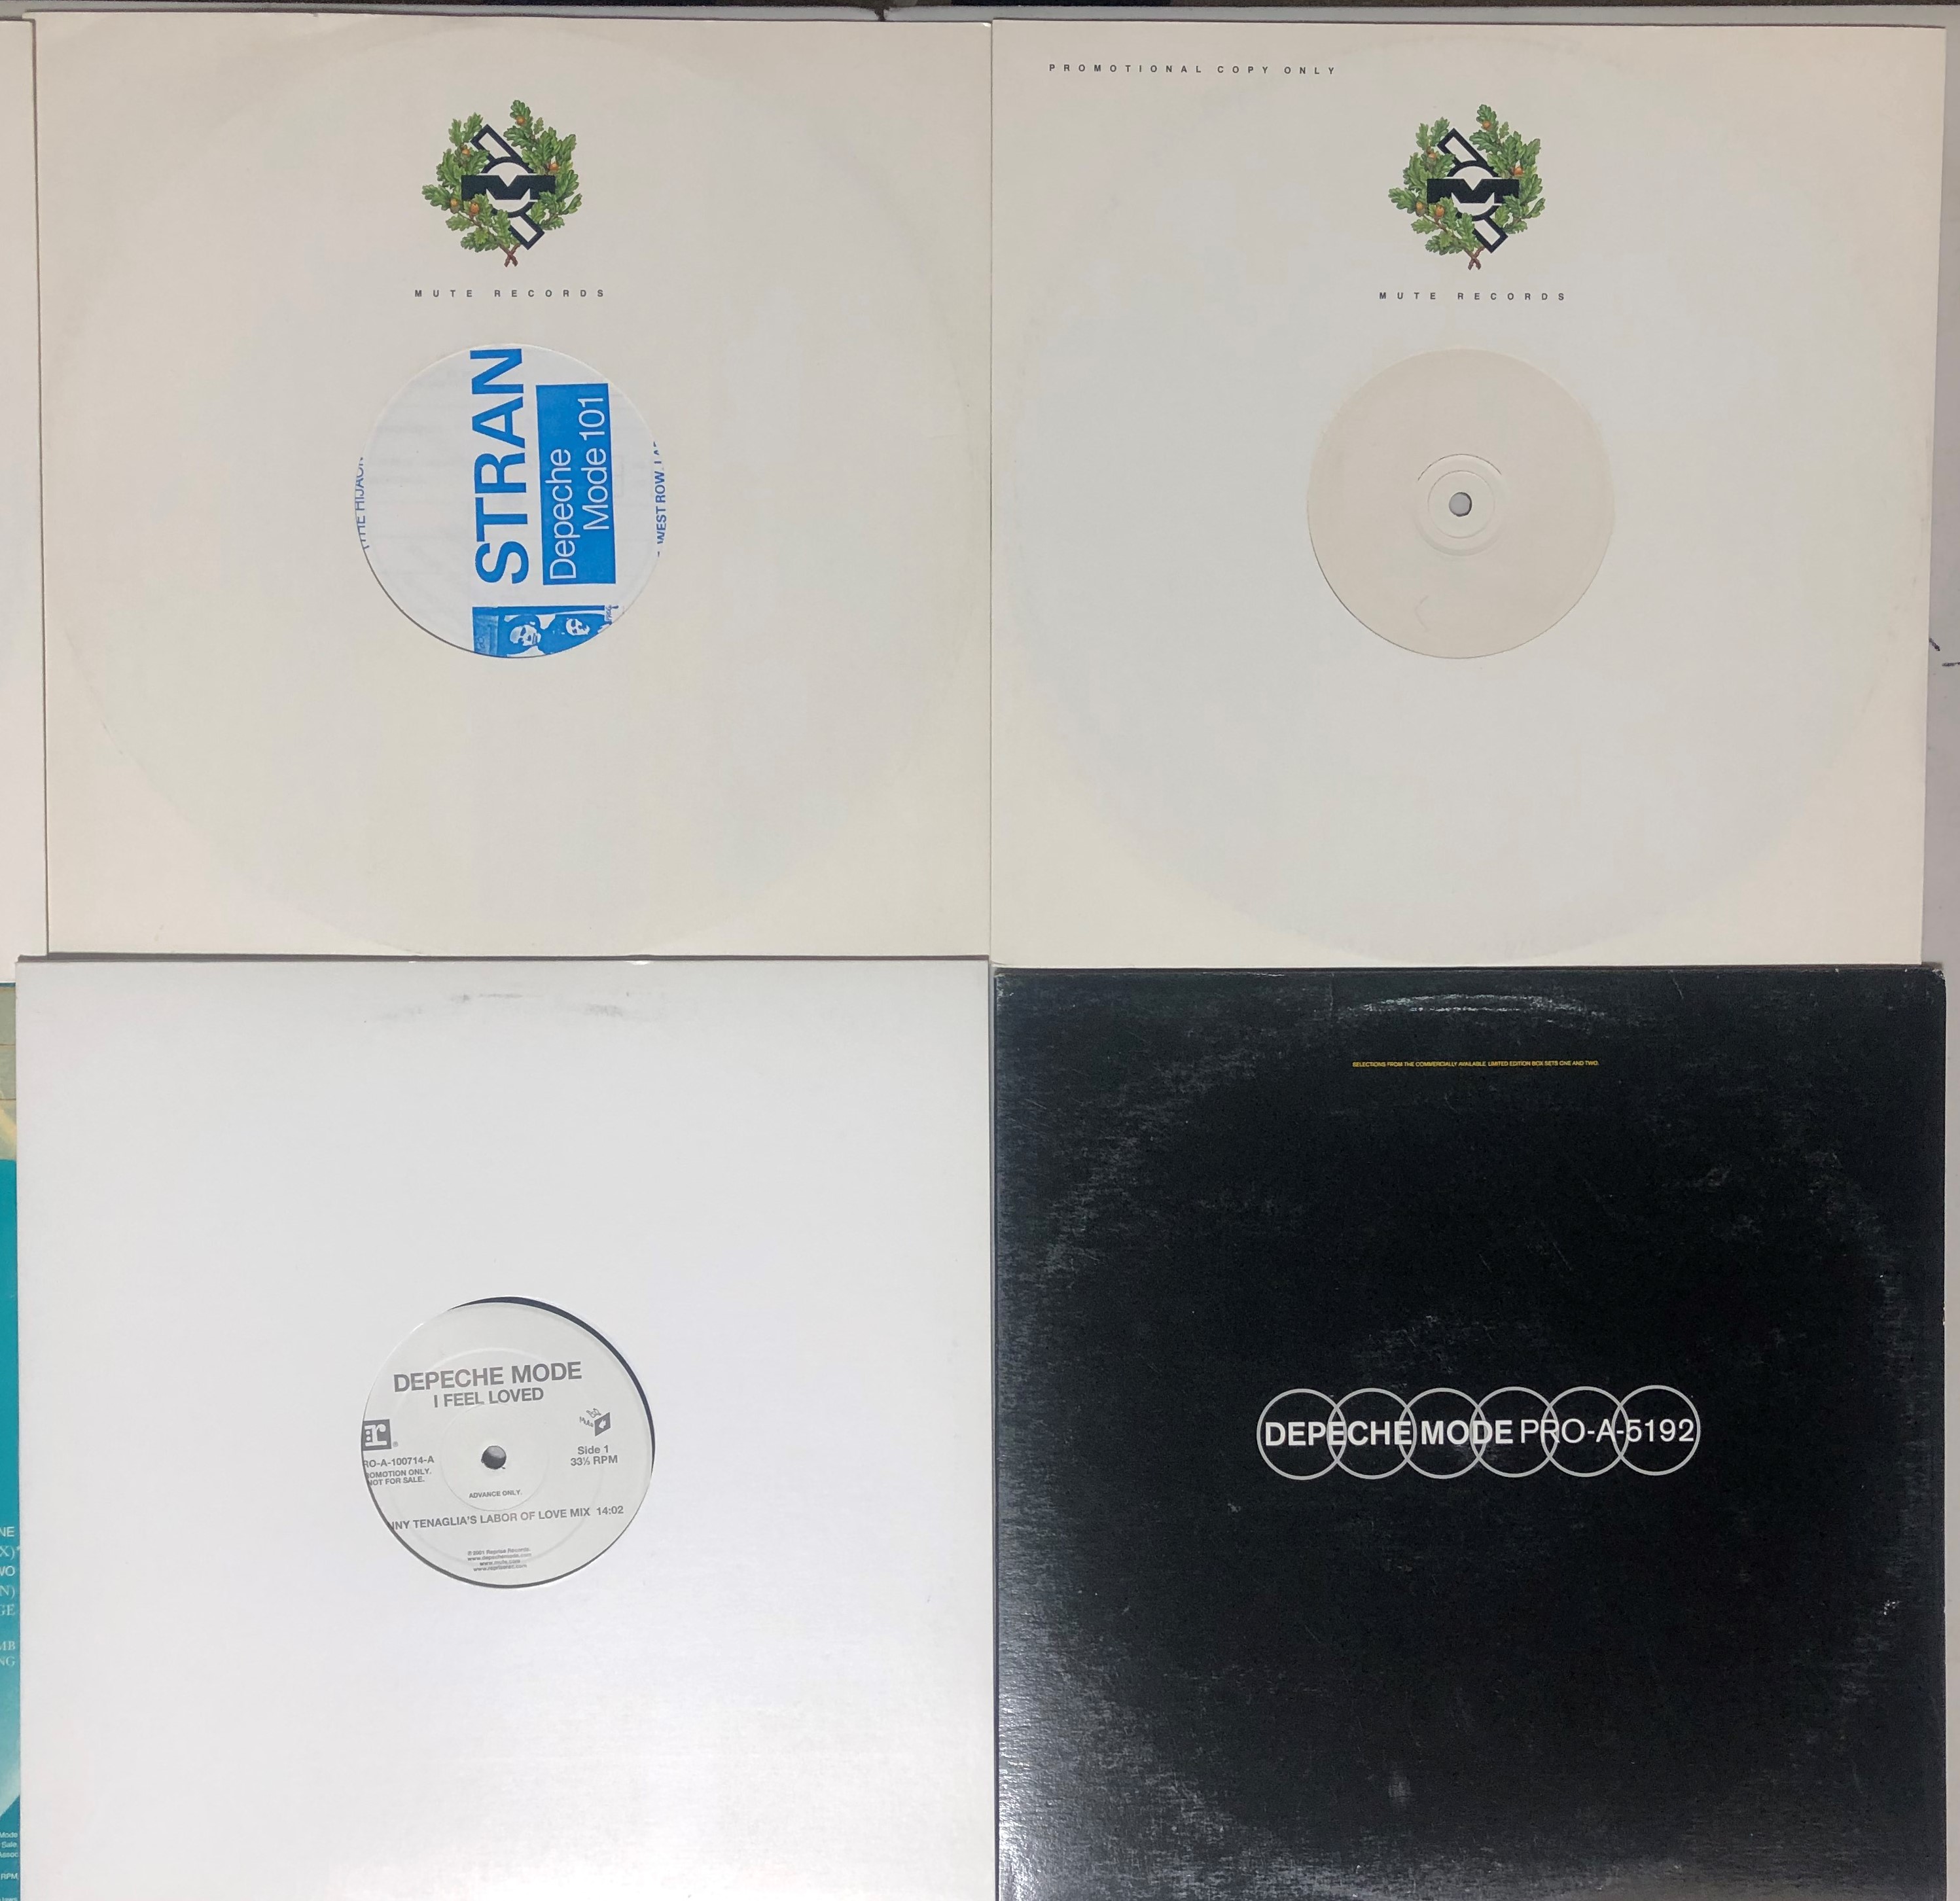 DEPECHE MODE - UK & US 12 PROMOS. Major collection of 12 x 12" promos from Depeche Mode. - Image 3 of 4